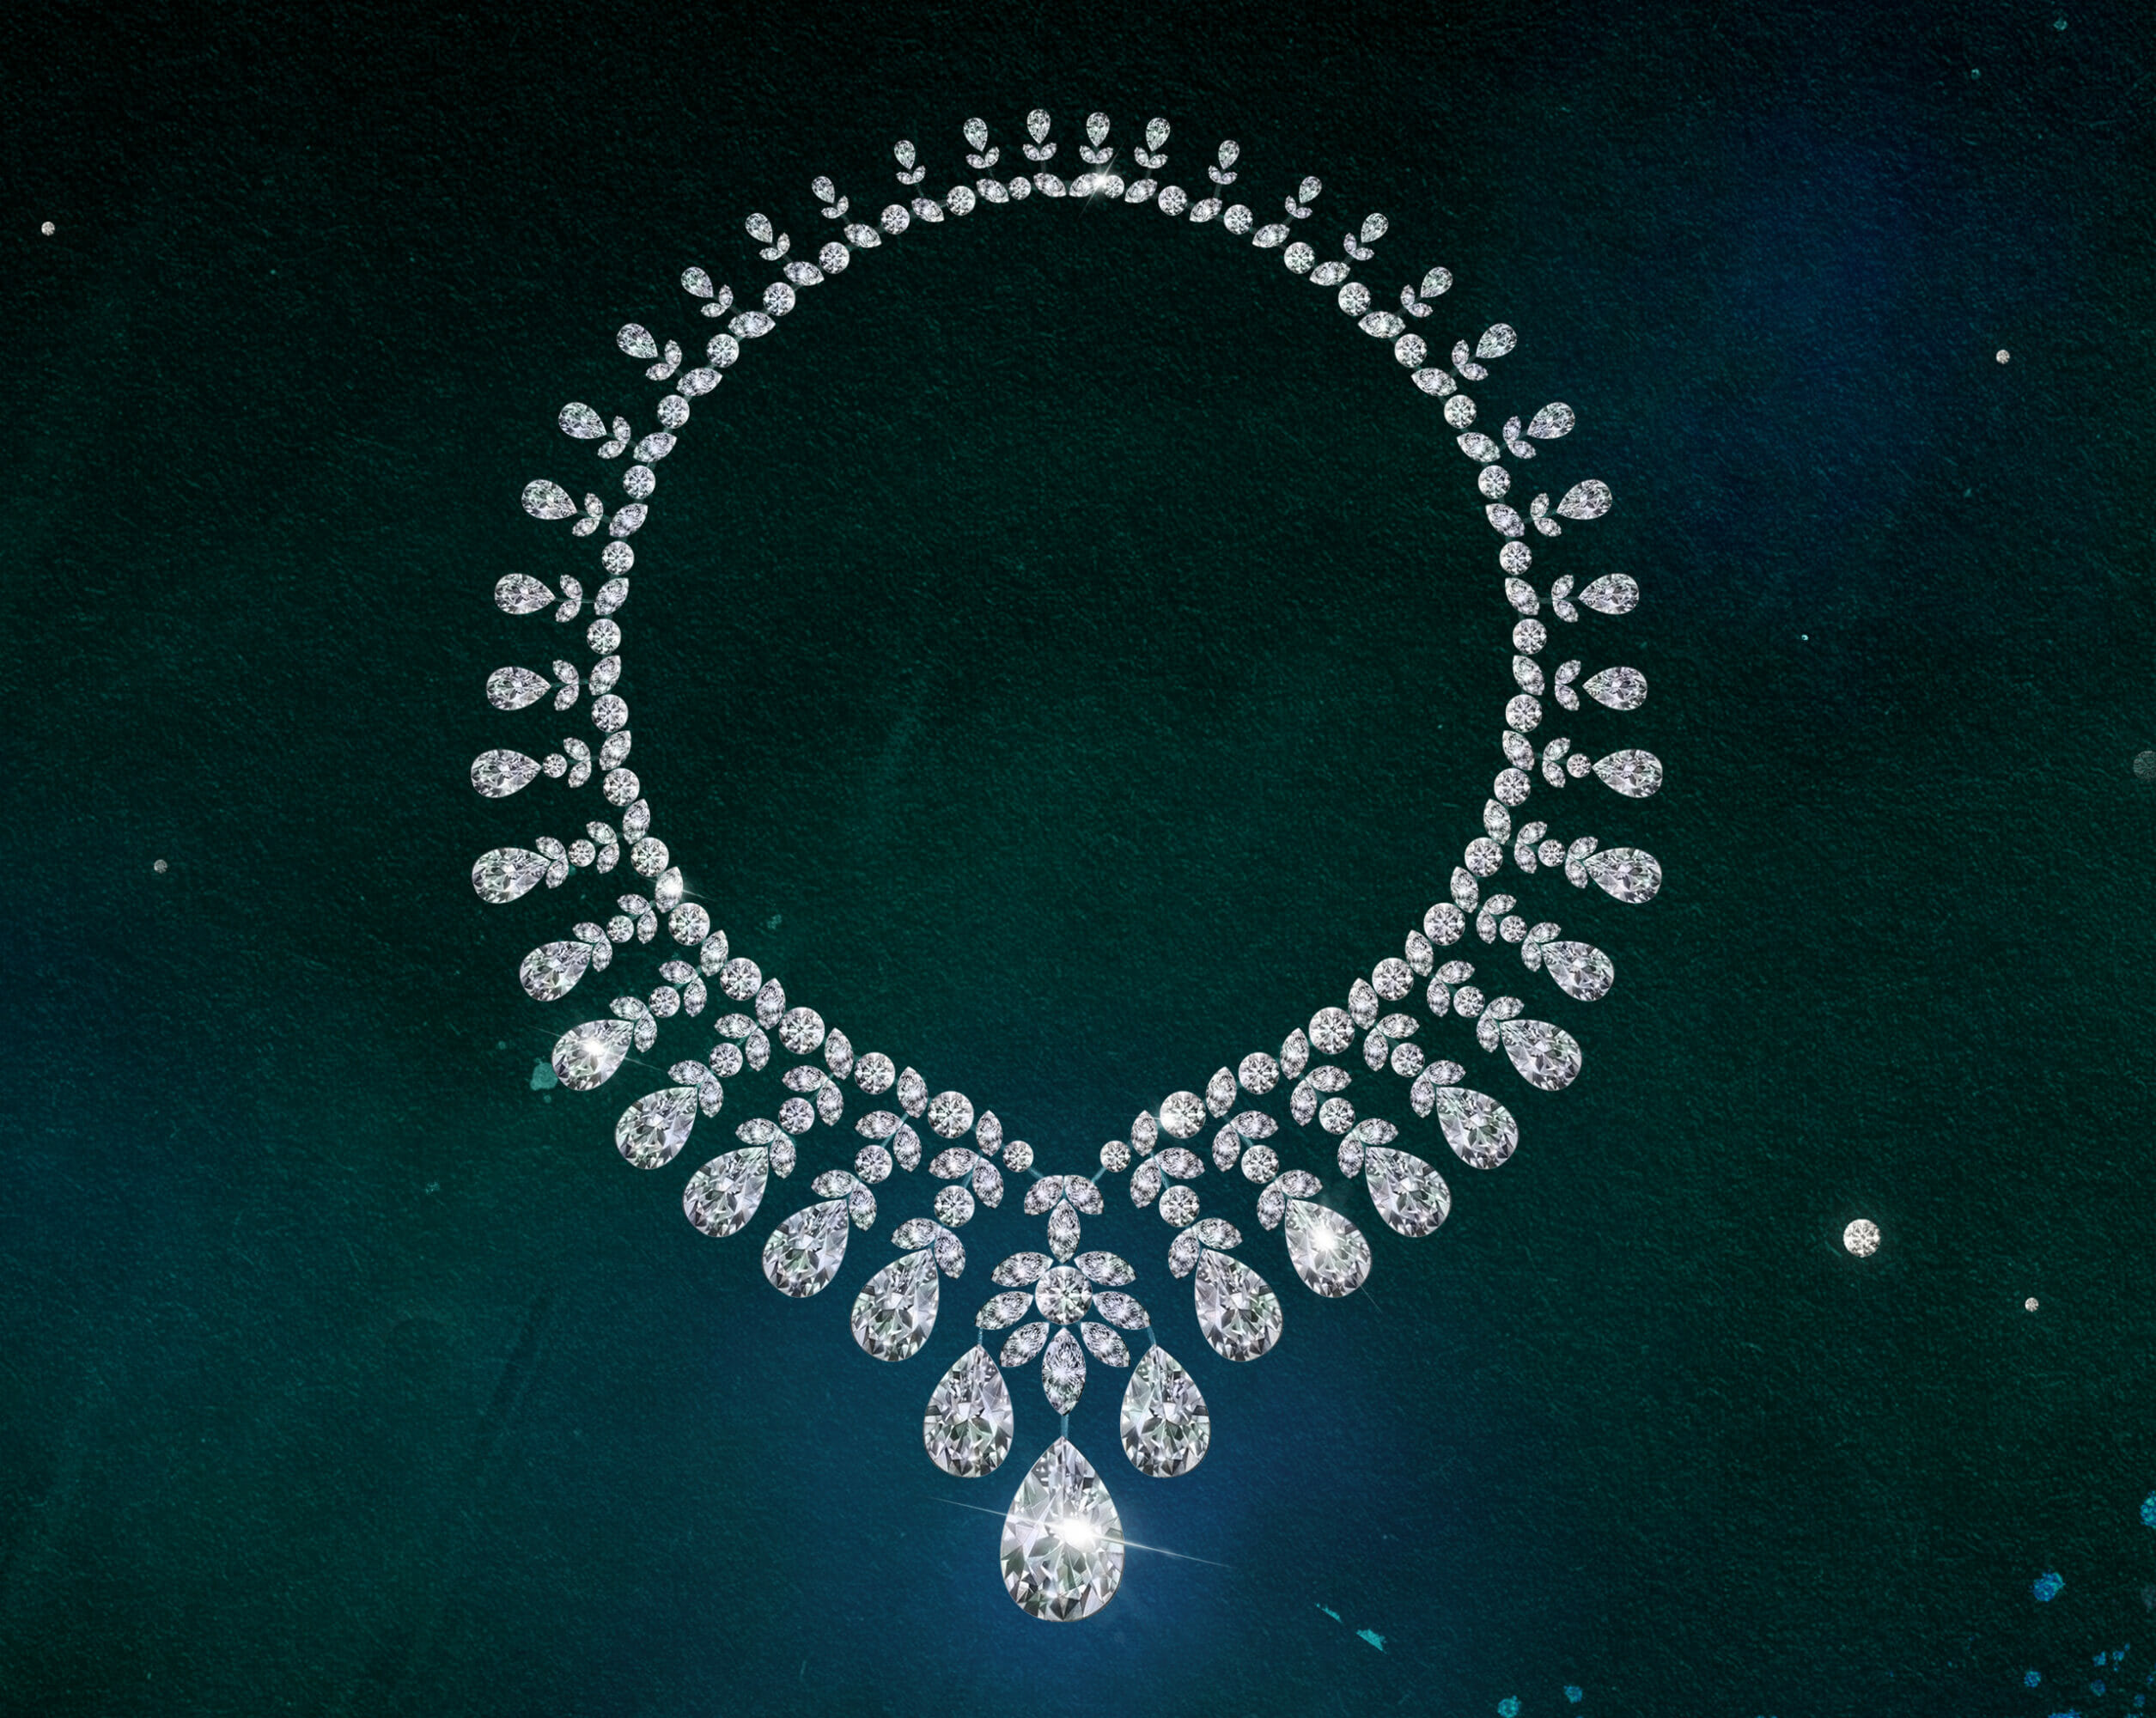 A stunning diamond necklace created by Ambaji Shinde for Pop Singer Madonna